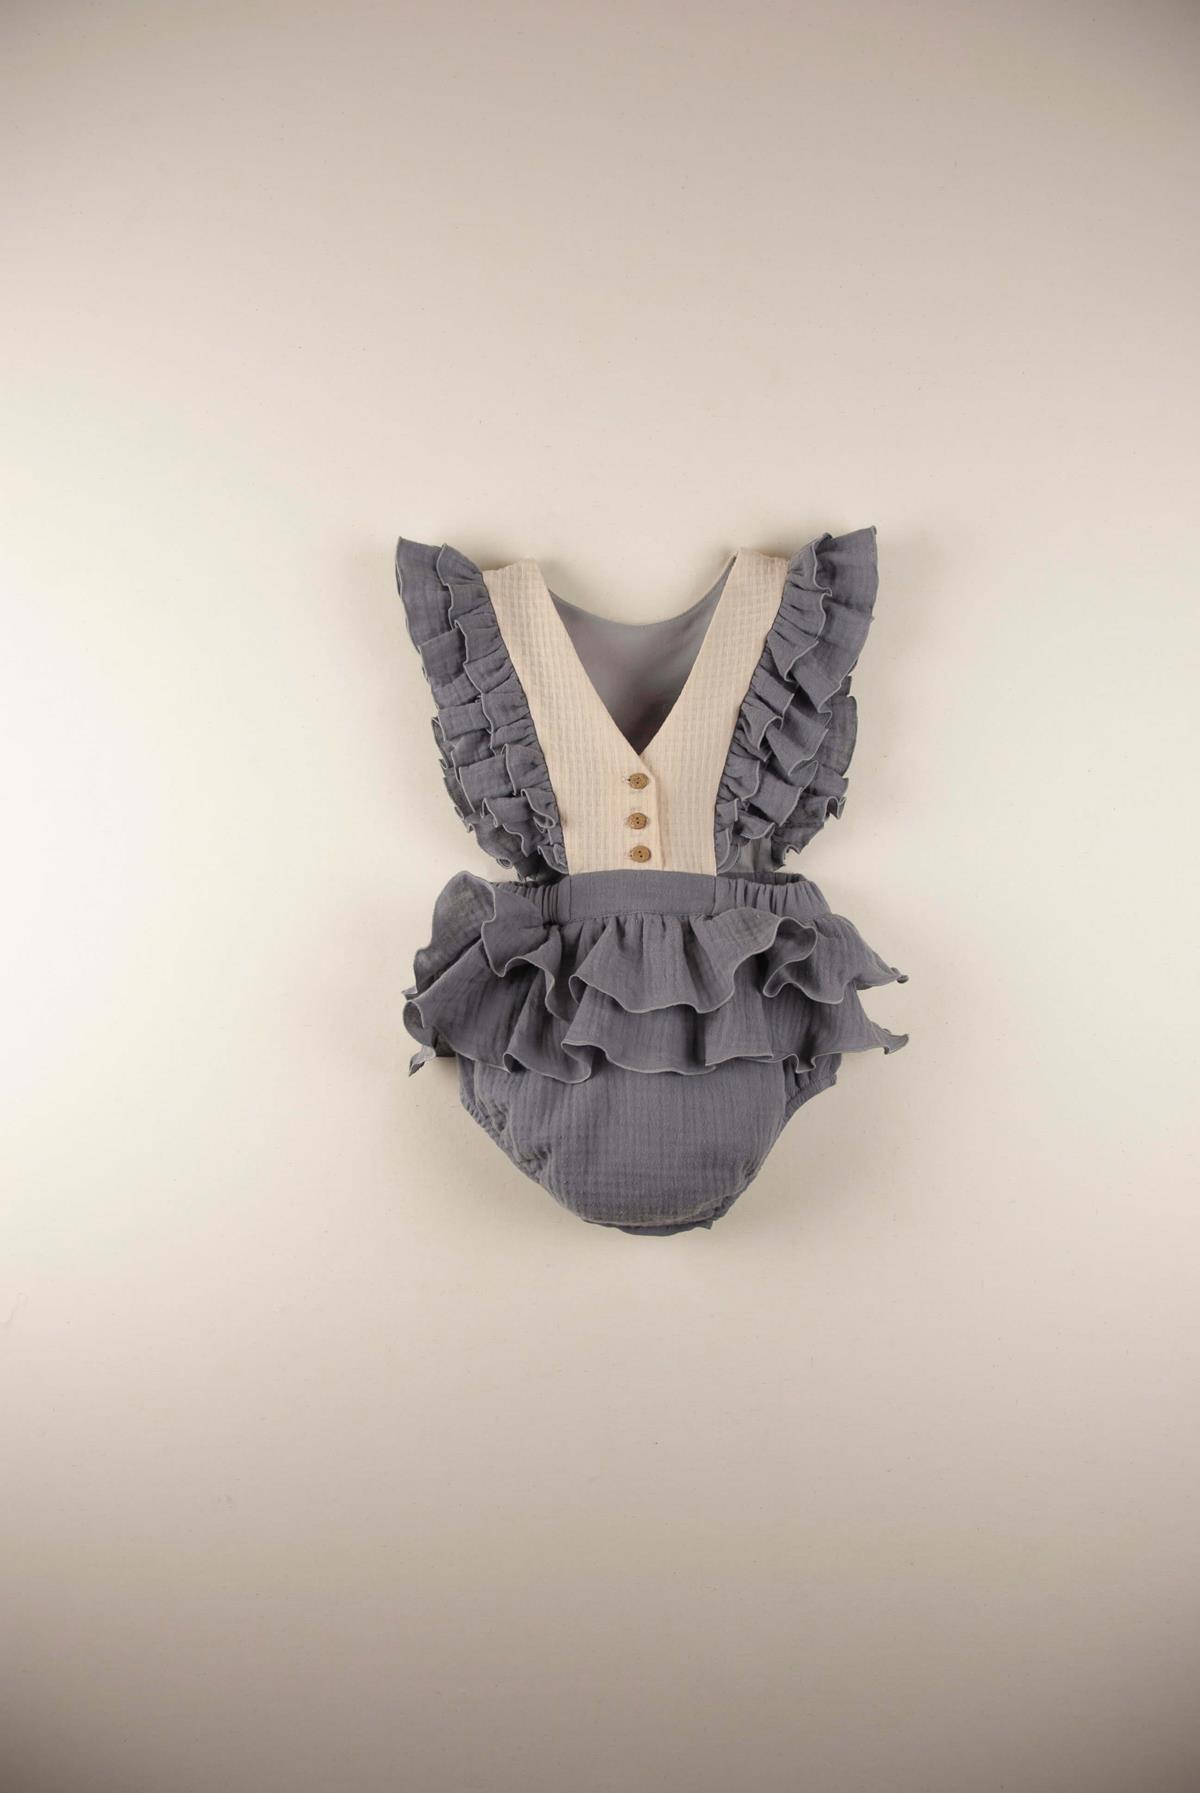 Mod.6.3 Greyish-blue romper suit with embroidered bib | SS22 Mod.6.3 Greyish-blue romper suit with embroidered bib | 1